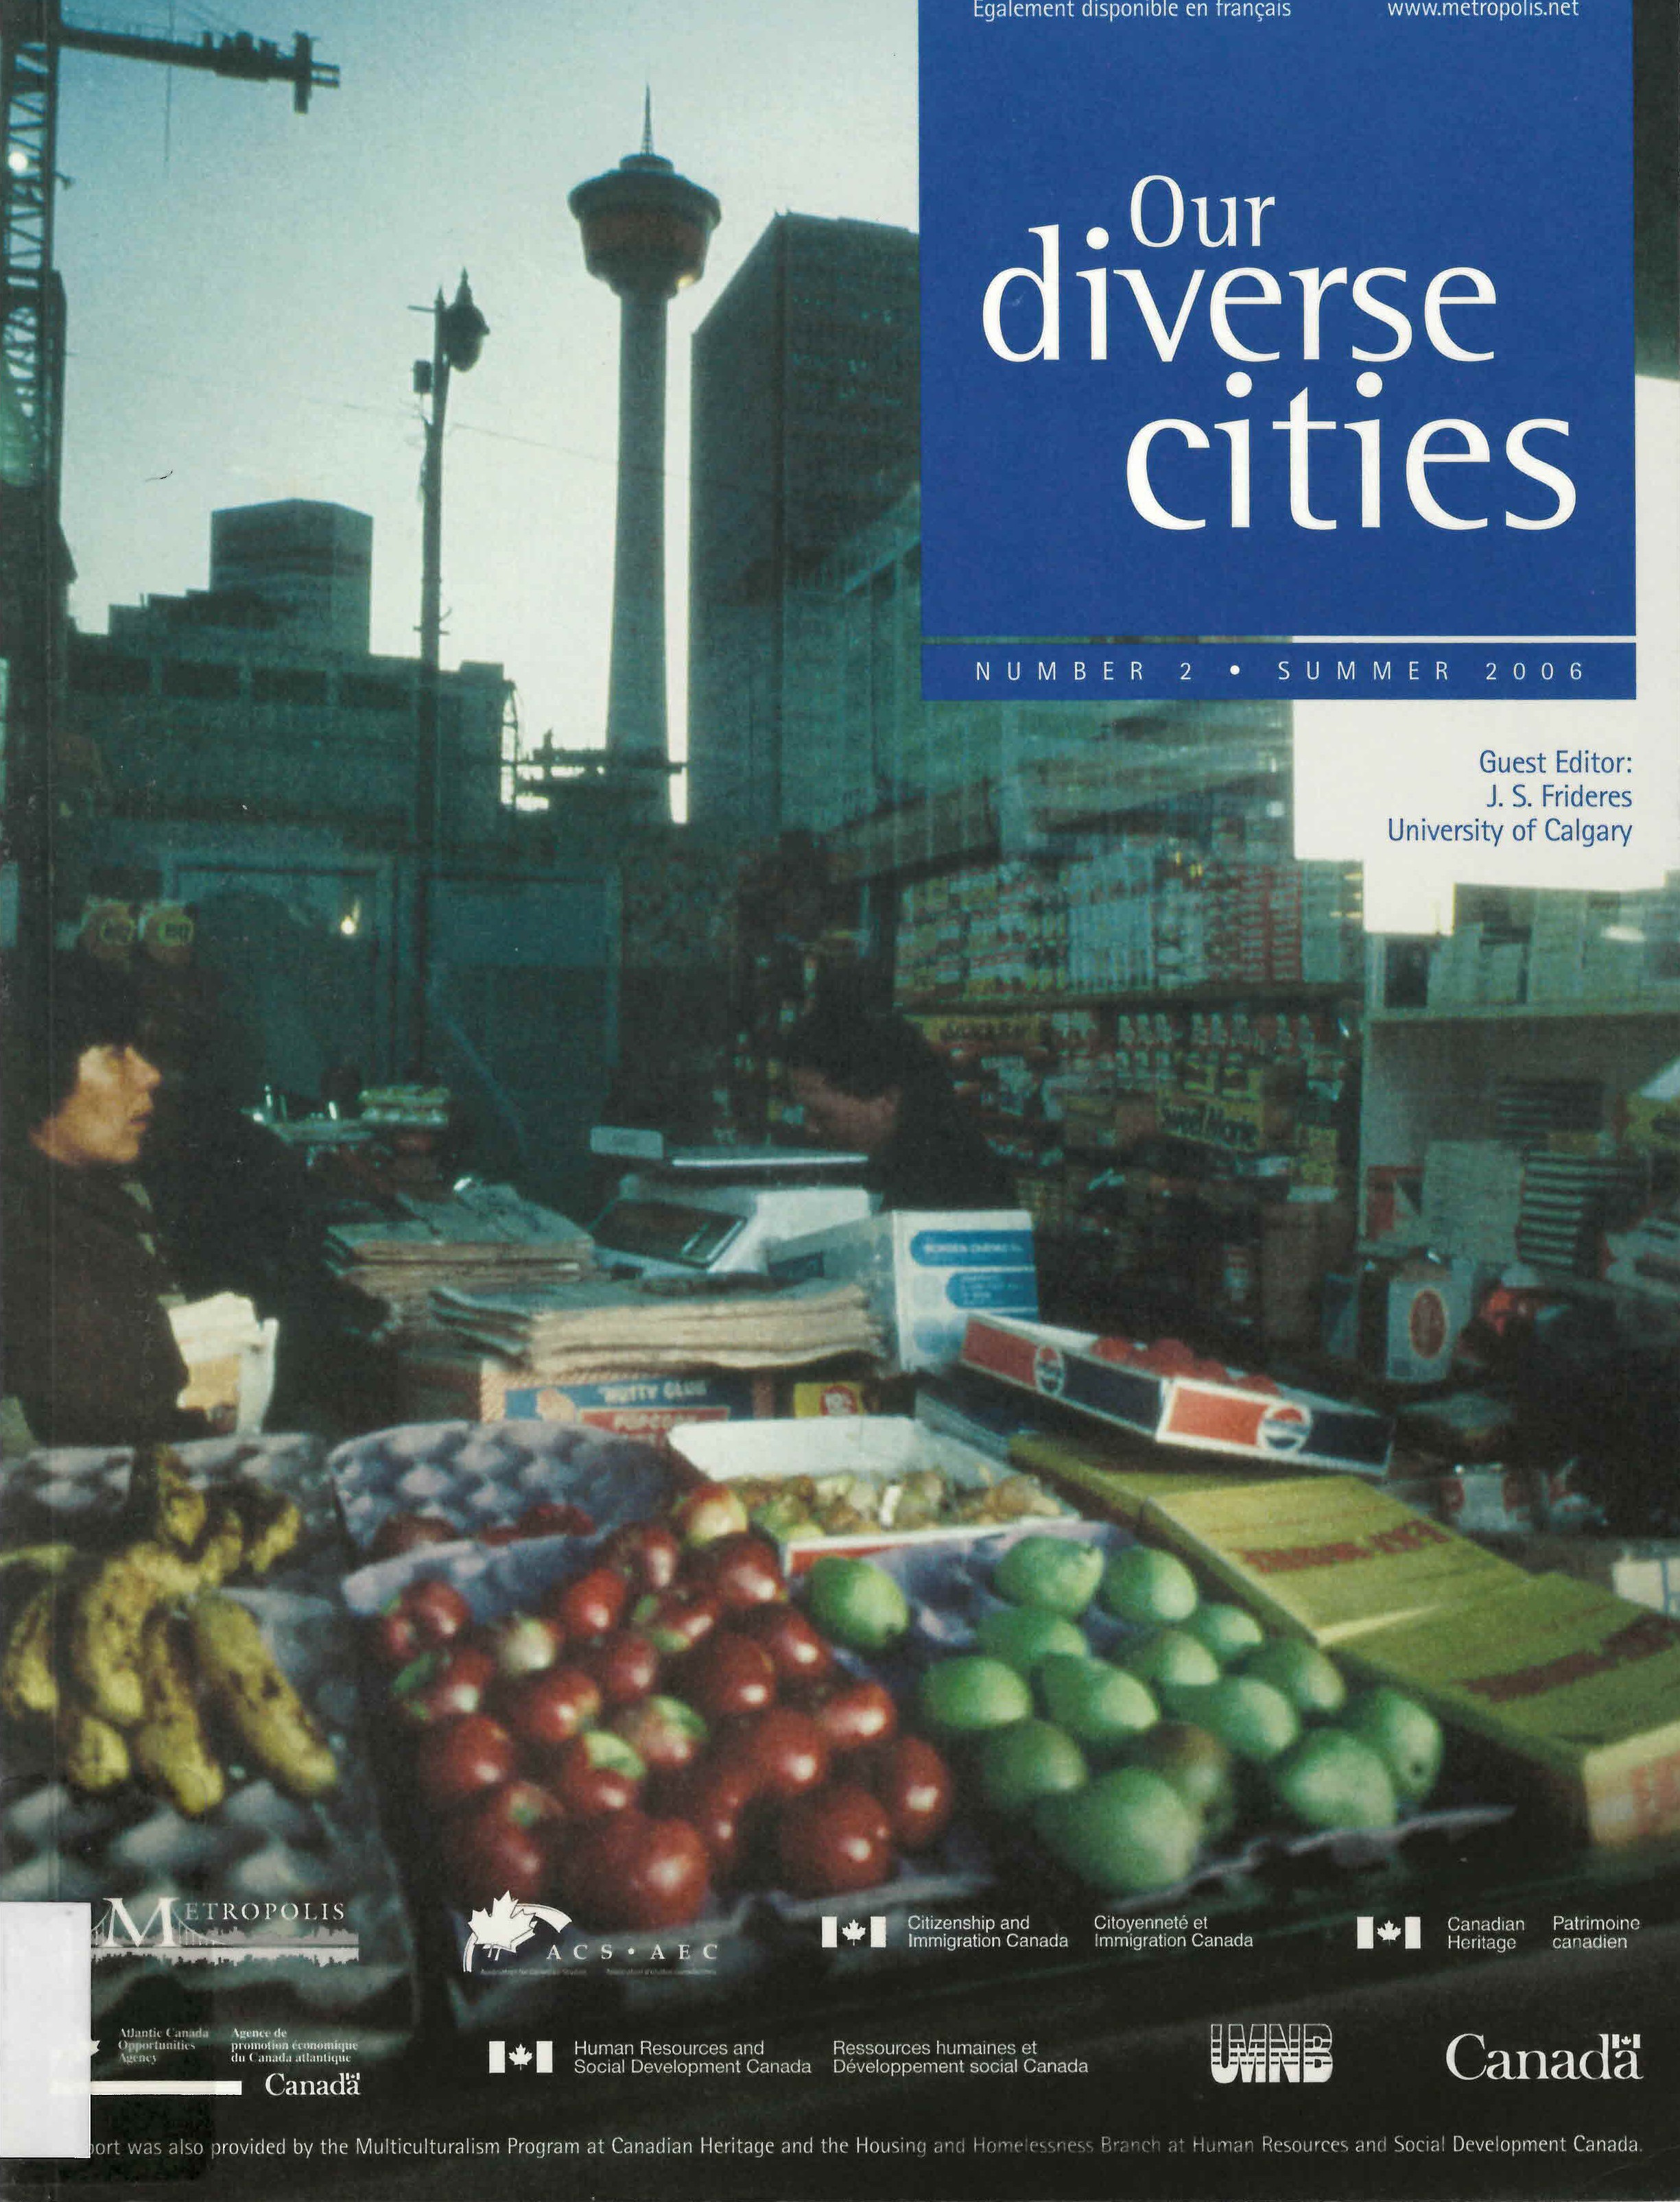 Our diverse cities